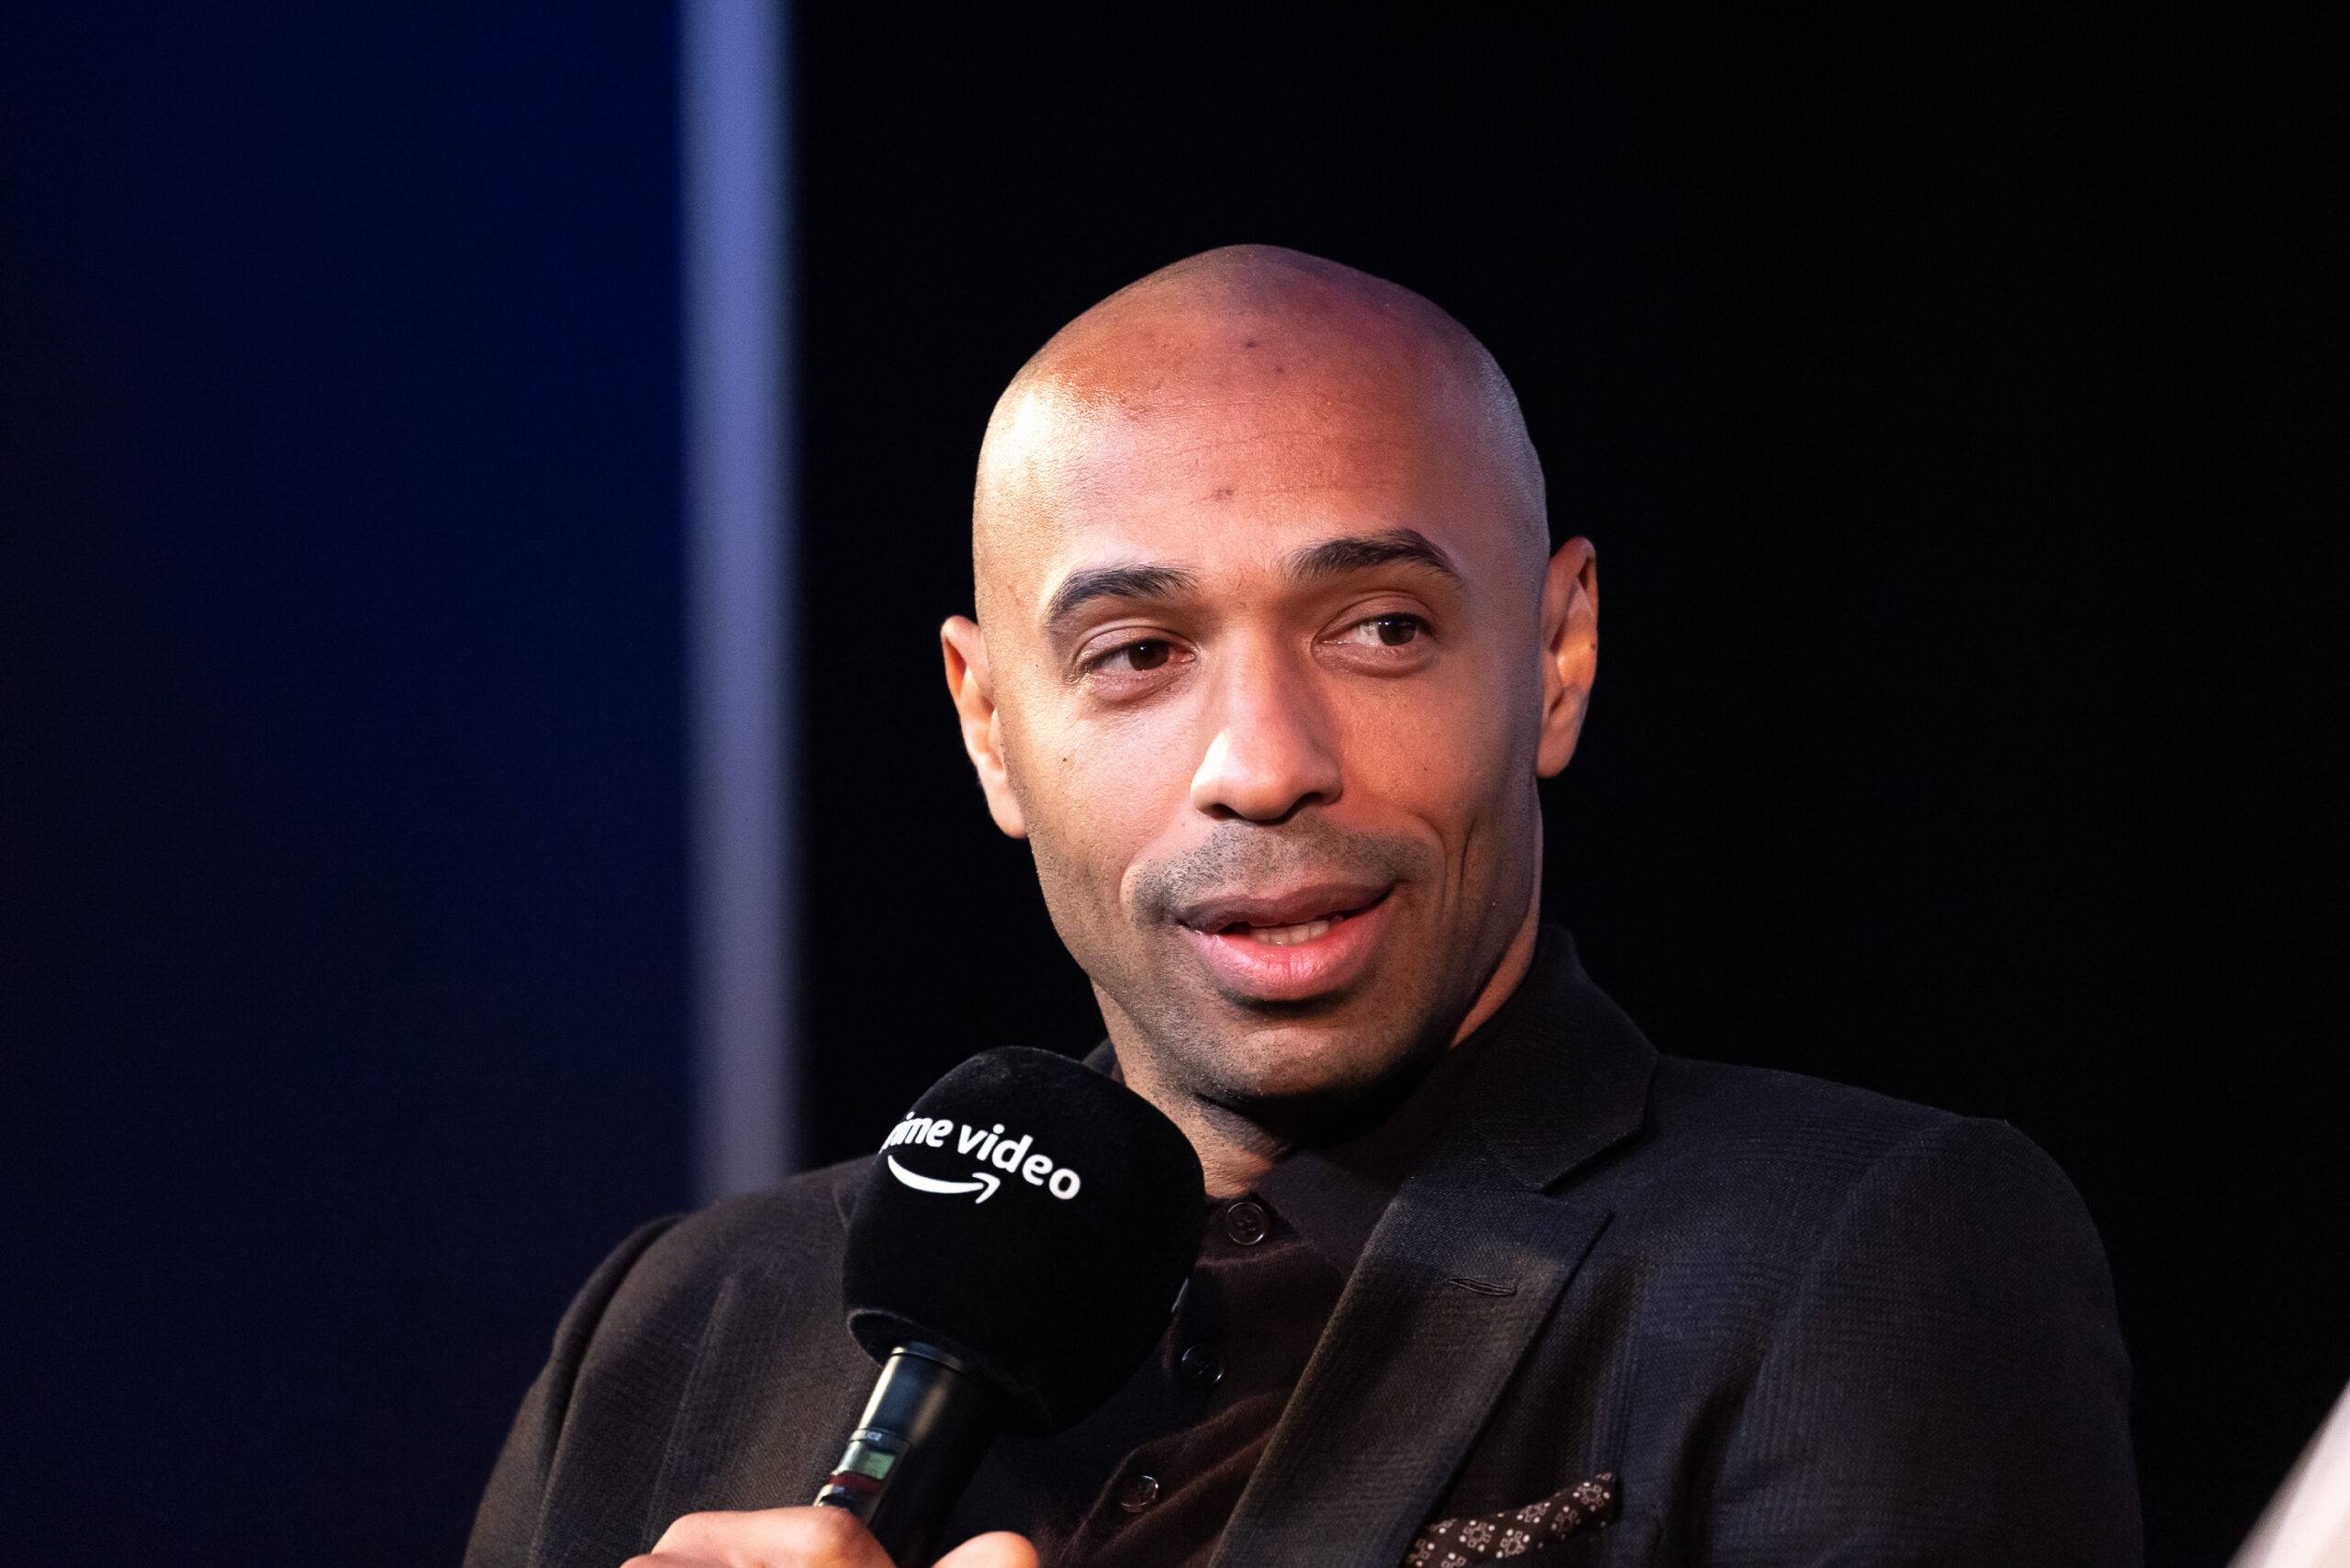 Thierry Henry saying he wouldn’t play for Bolton during Haaland v Lewandowski debate is great TV